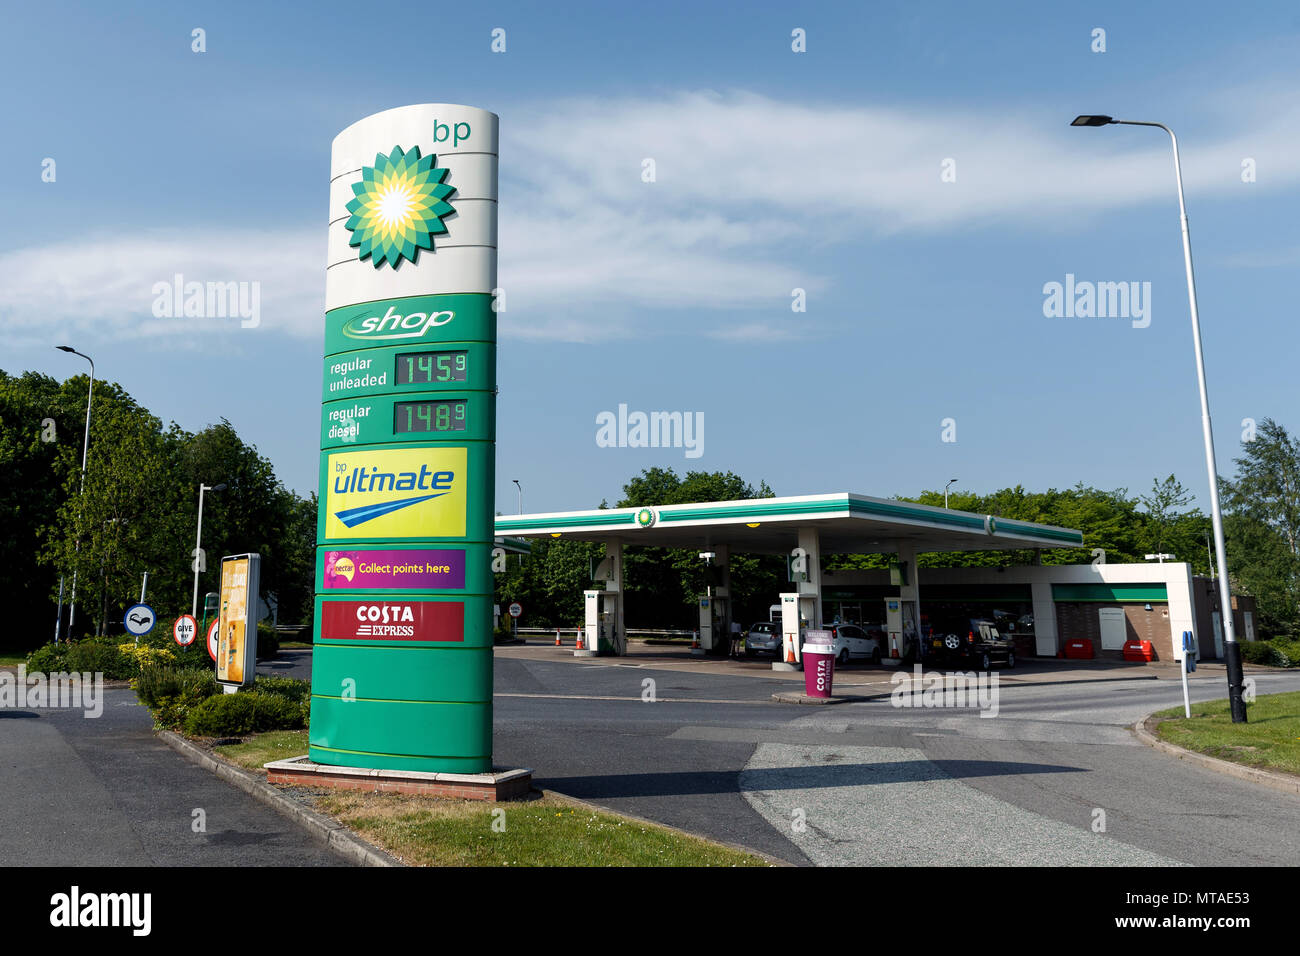 A BP petrol station displaying high petrol prices in the United Kingdom. BP gas station, BP